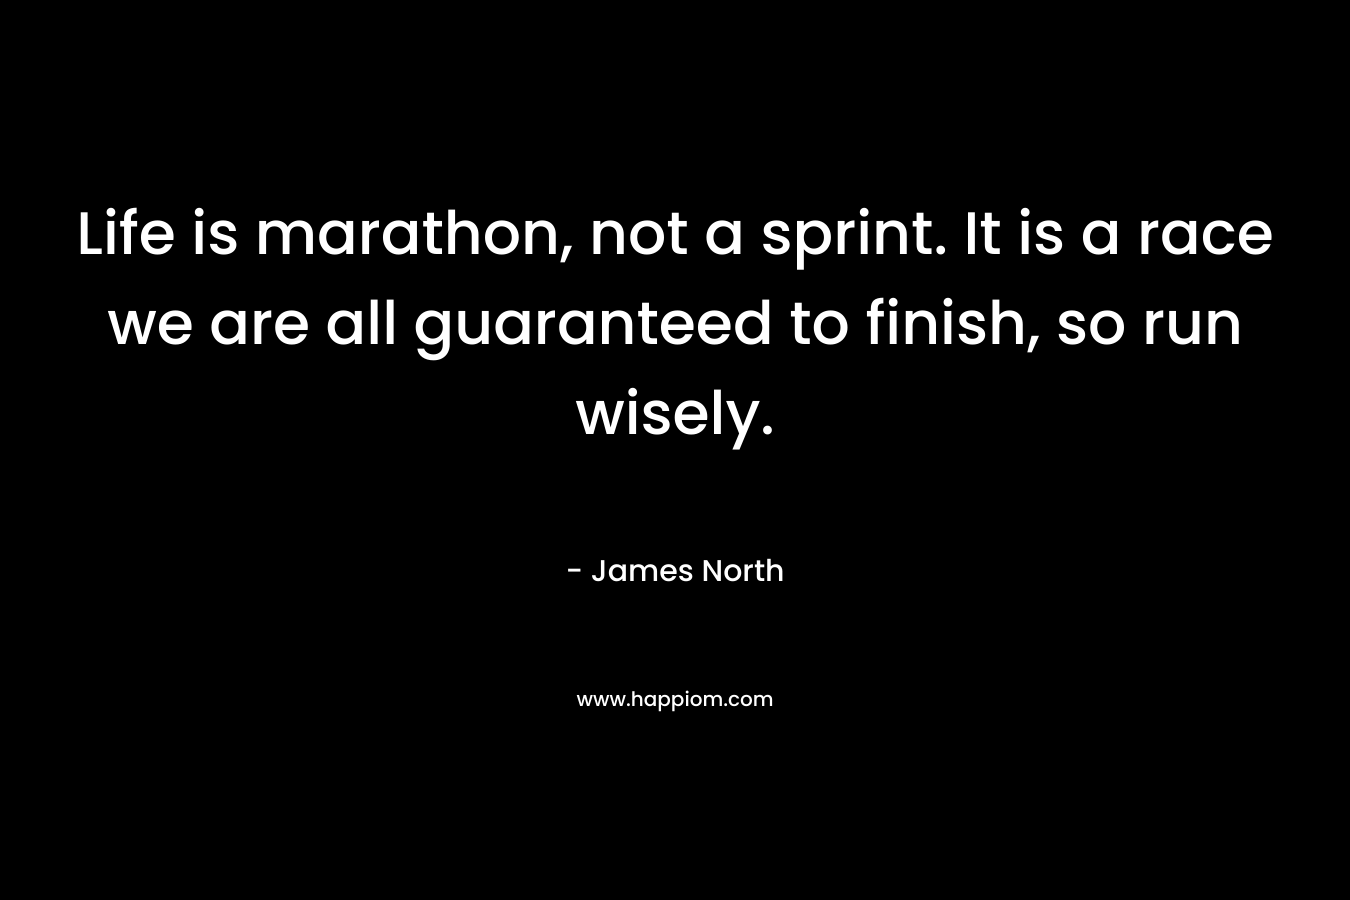 Life is marathon, not a sprint. It is a race we are all guaranteed to finish, so run wisely.